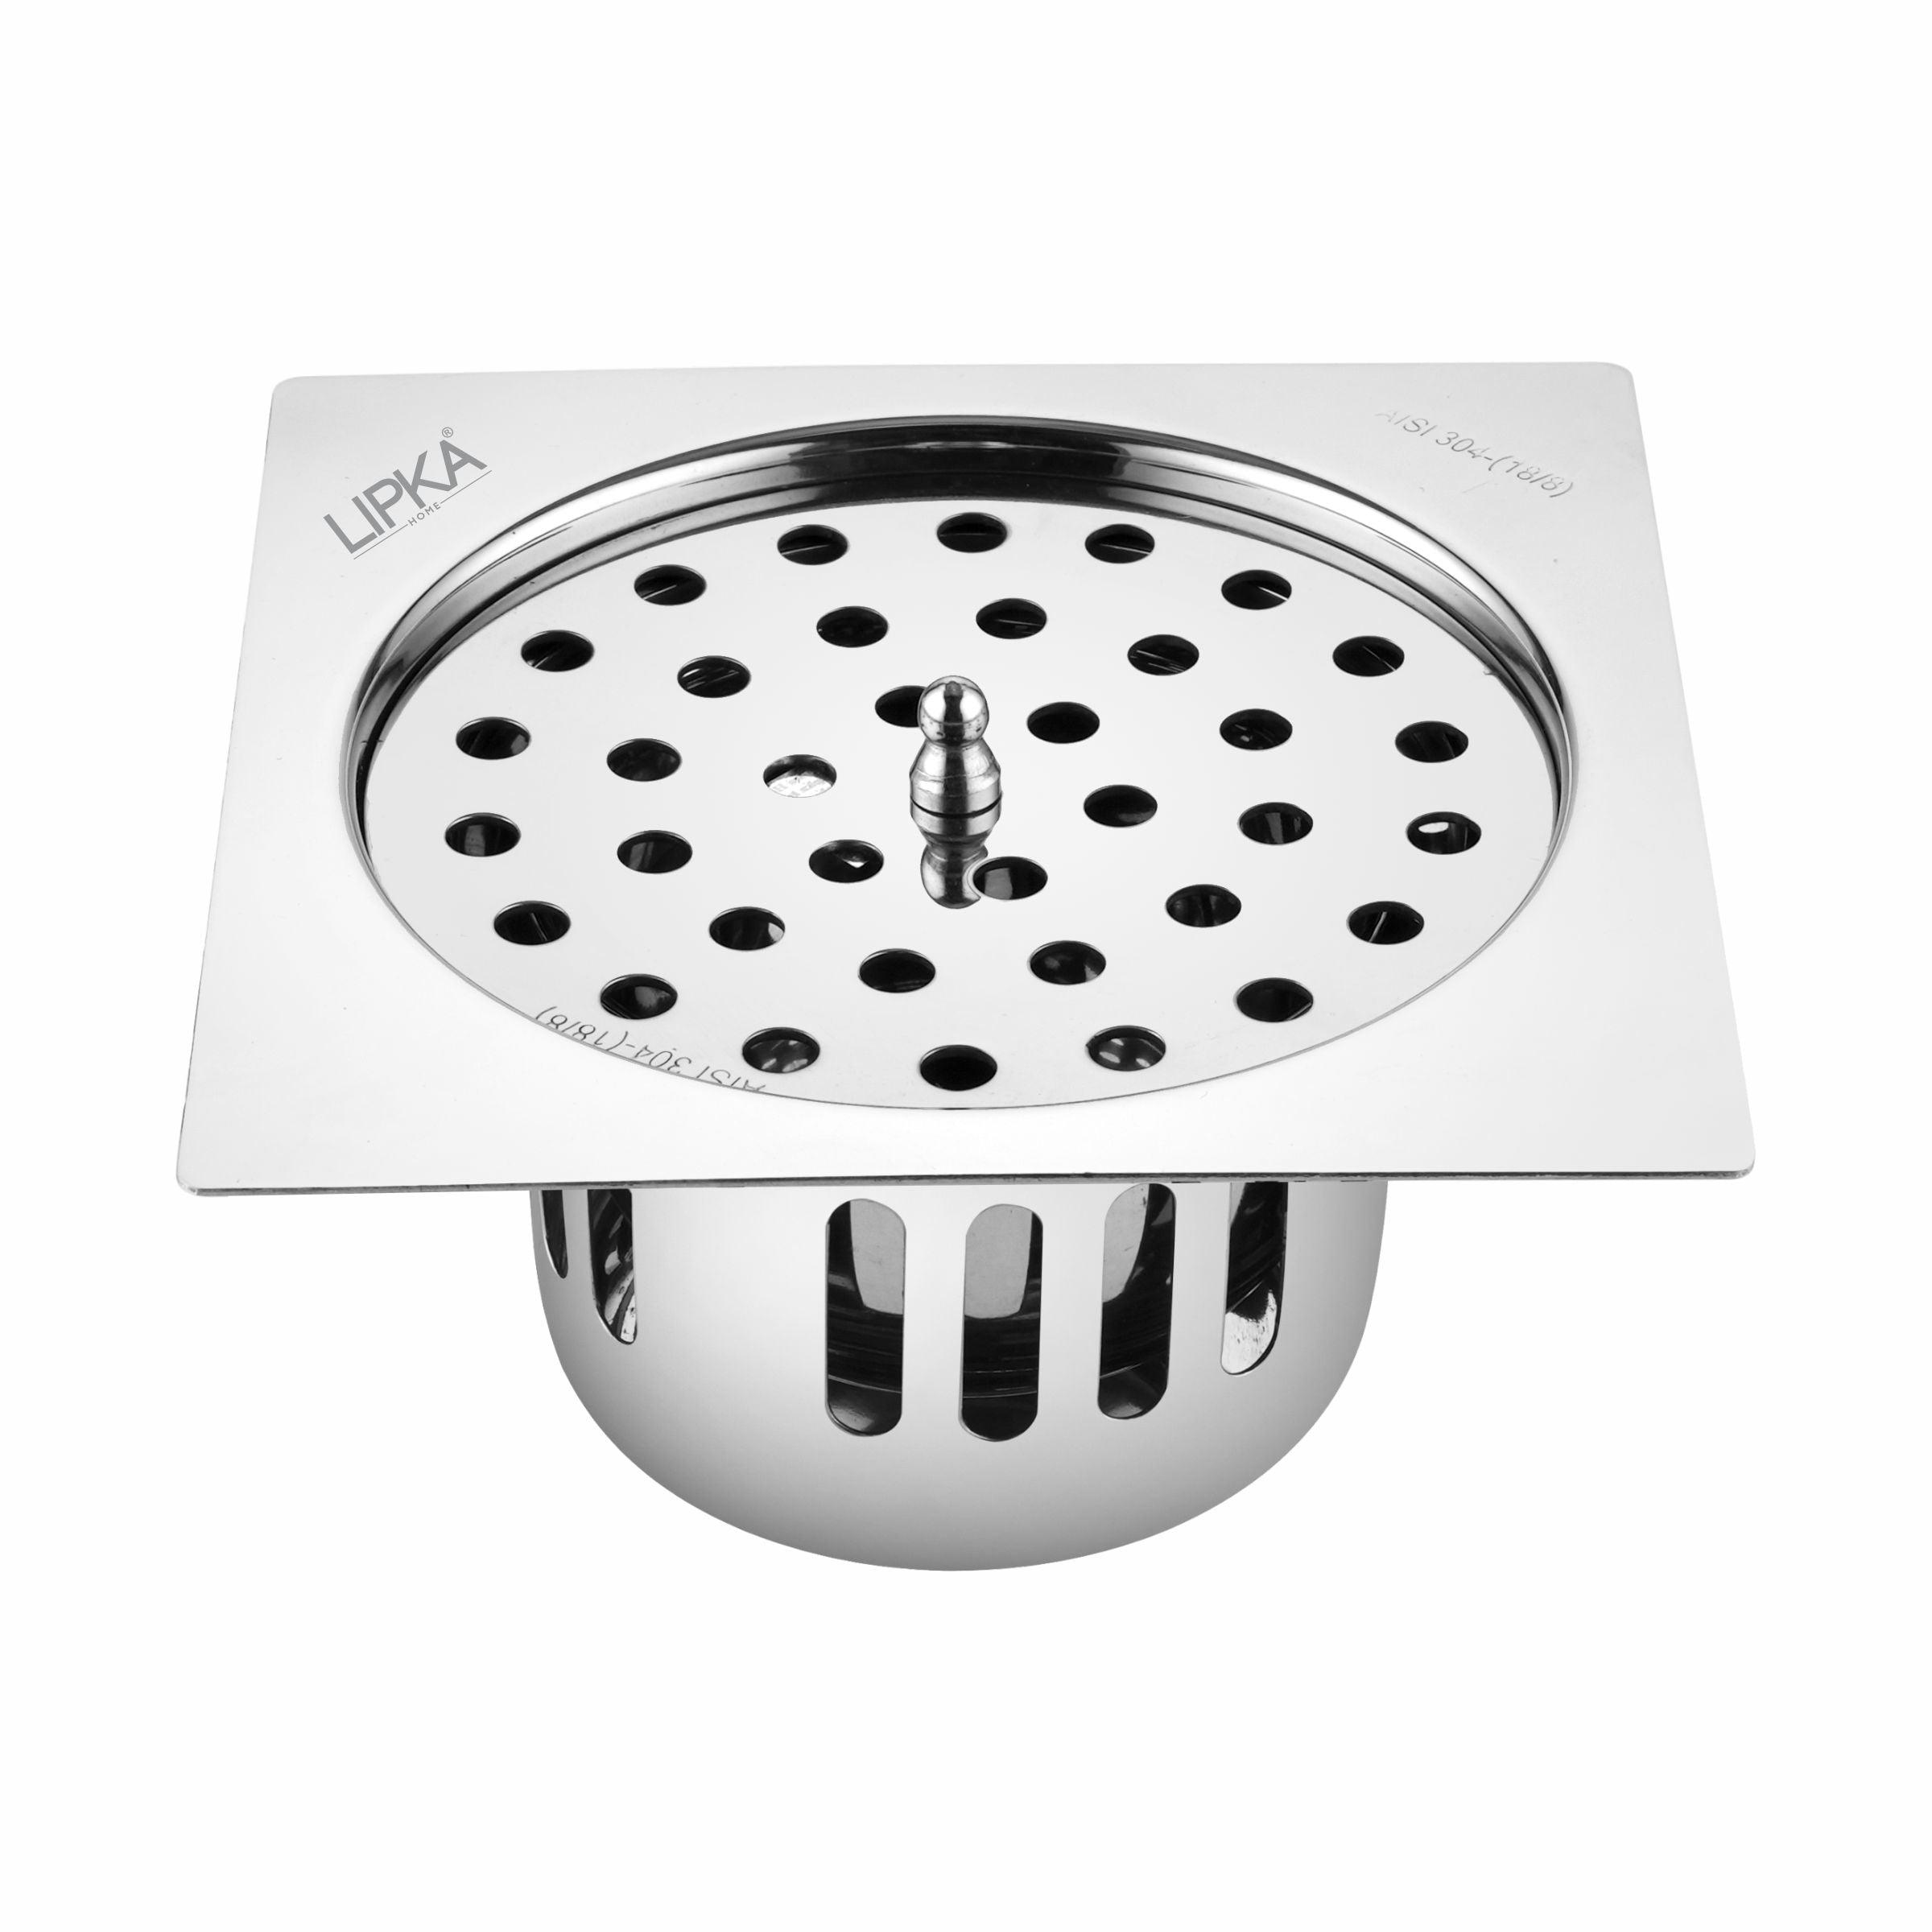 Square Flat Cut Floor Drain (5.5 x 5.5 Inches) with Lid and Cockroach Trap - LIPKA - Lipka Home